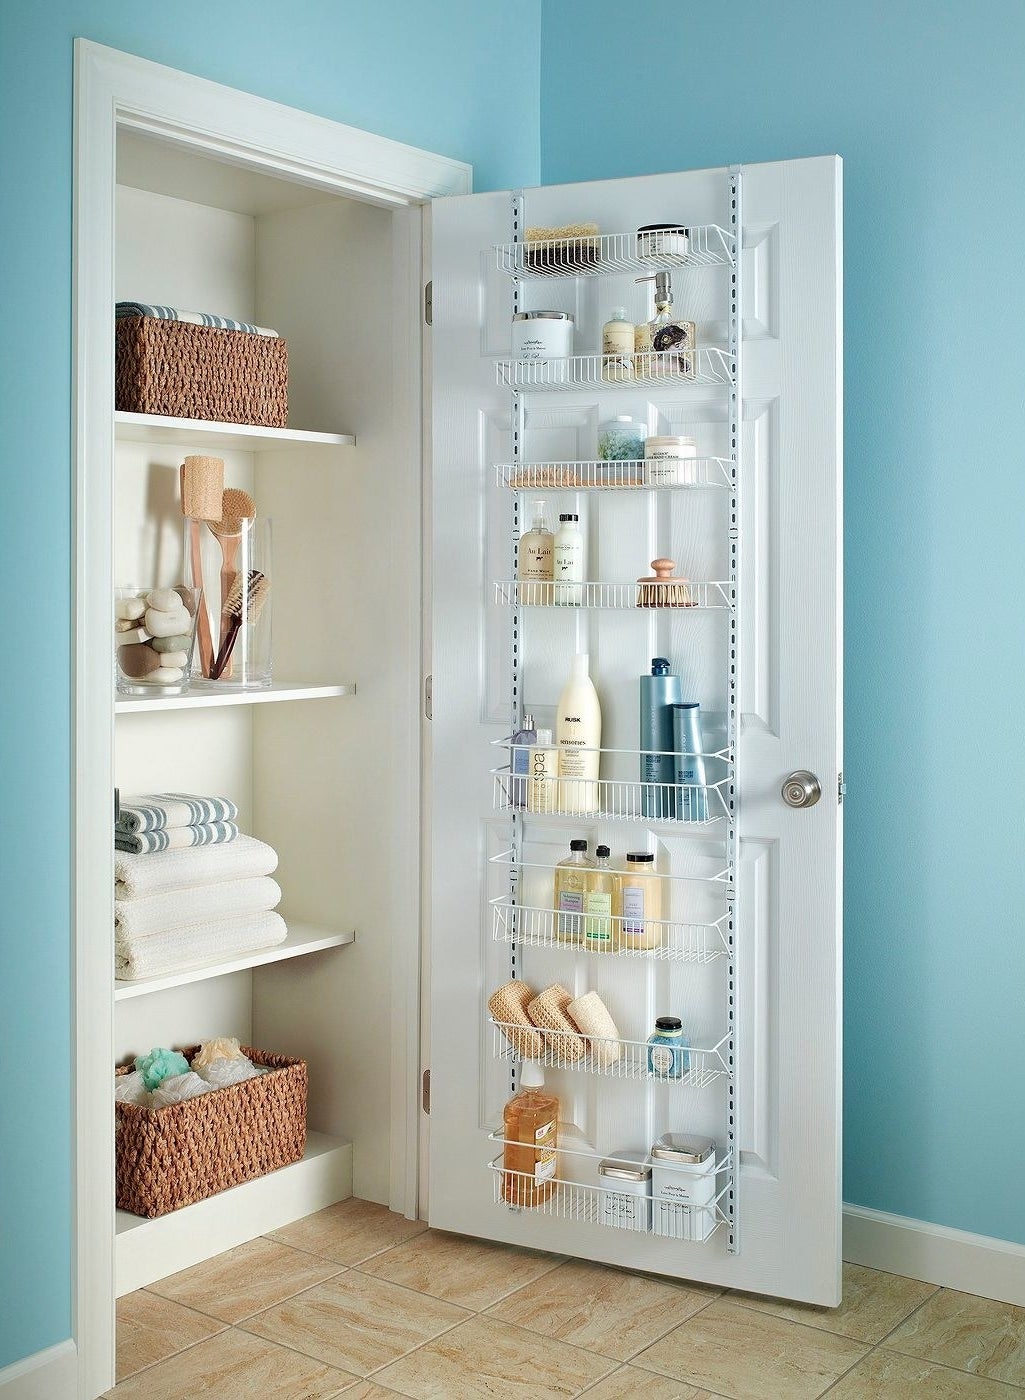 eight-shelf wire rack on the back of a bathroom door, storing all sorts of soaps, sponges, and more